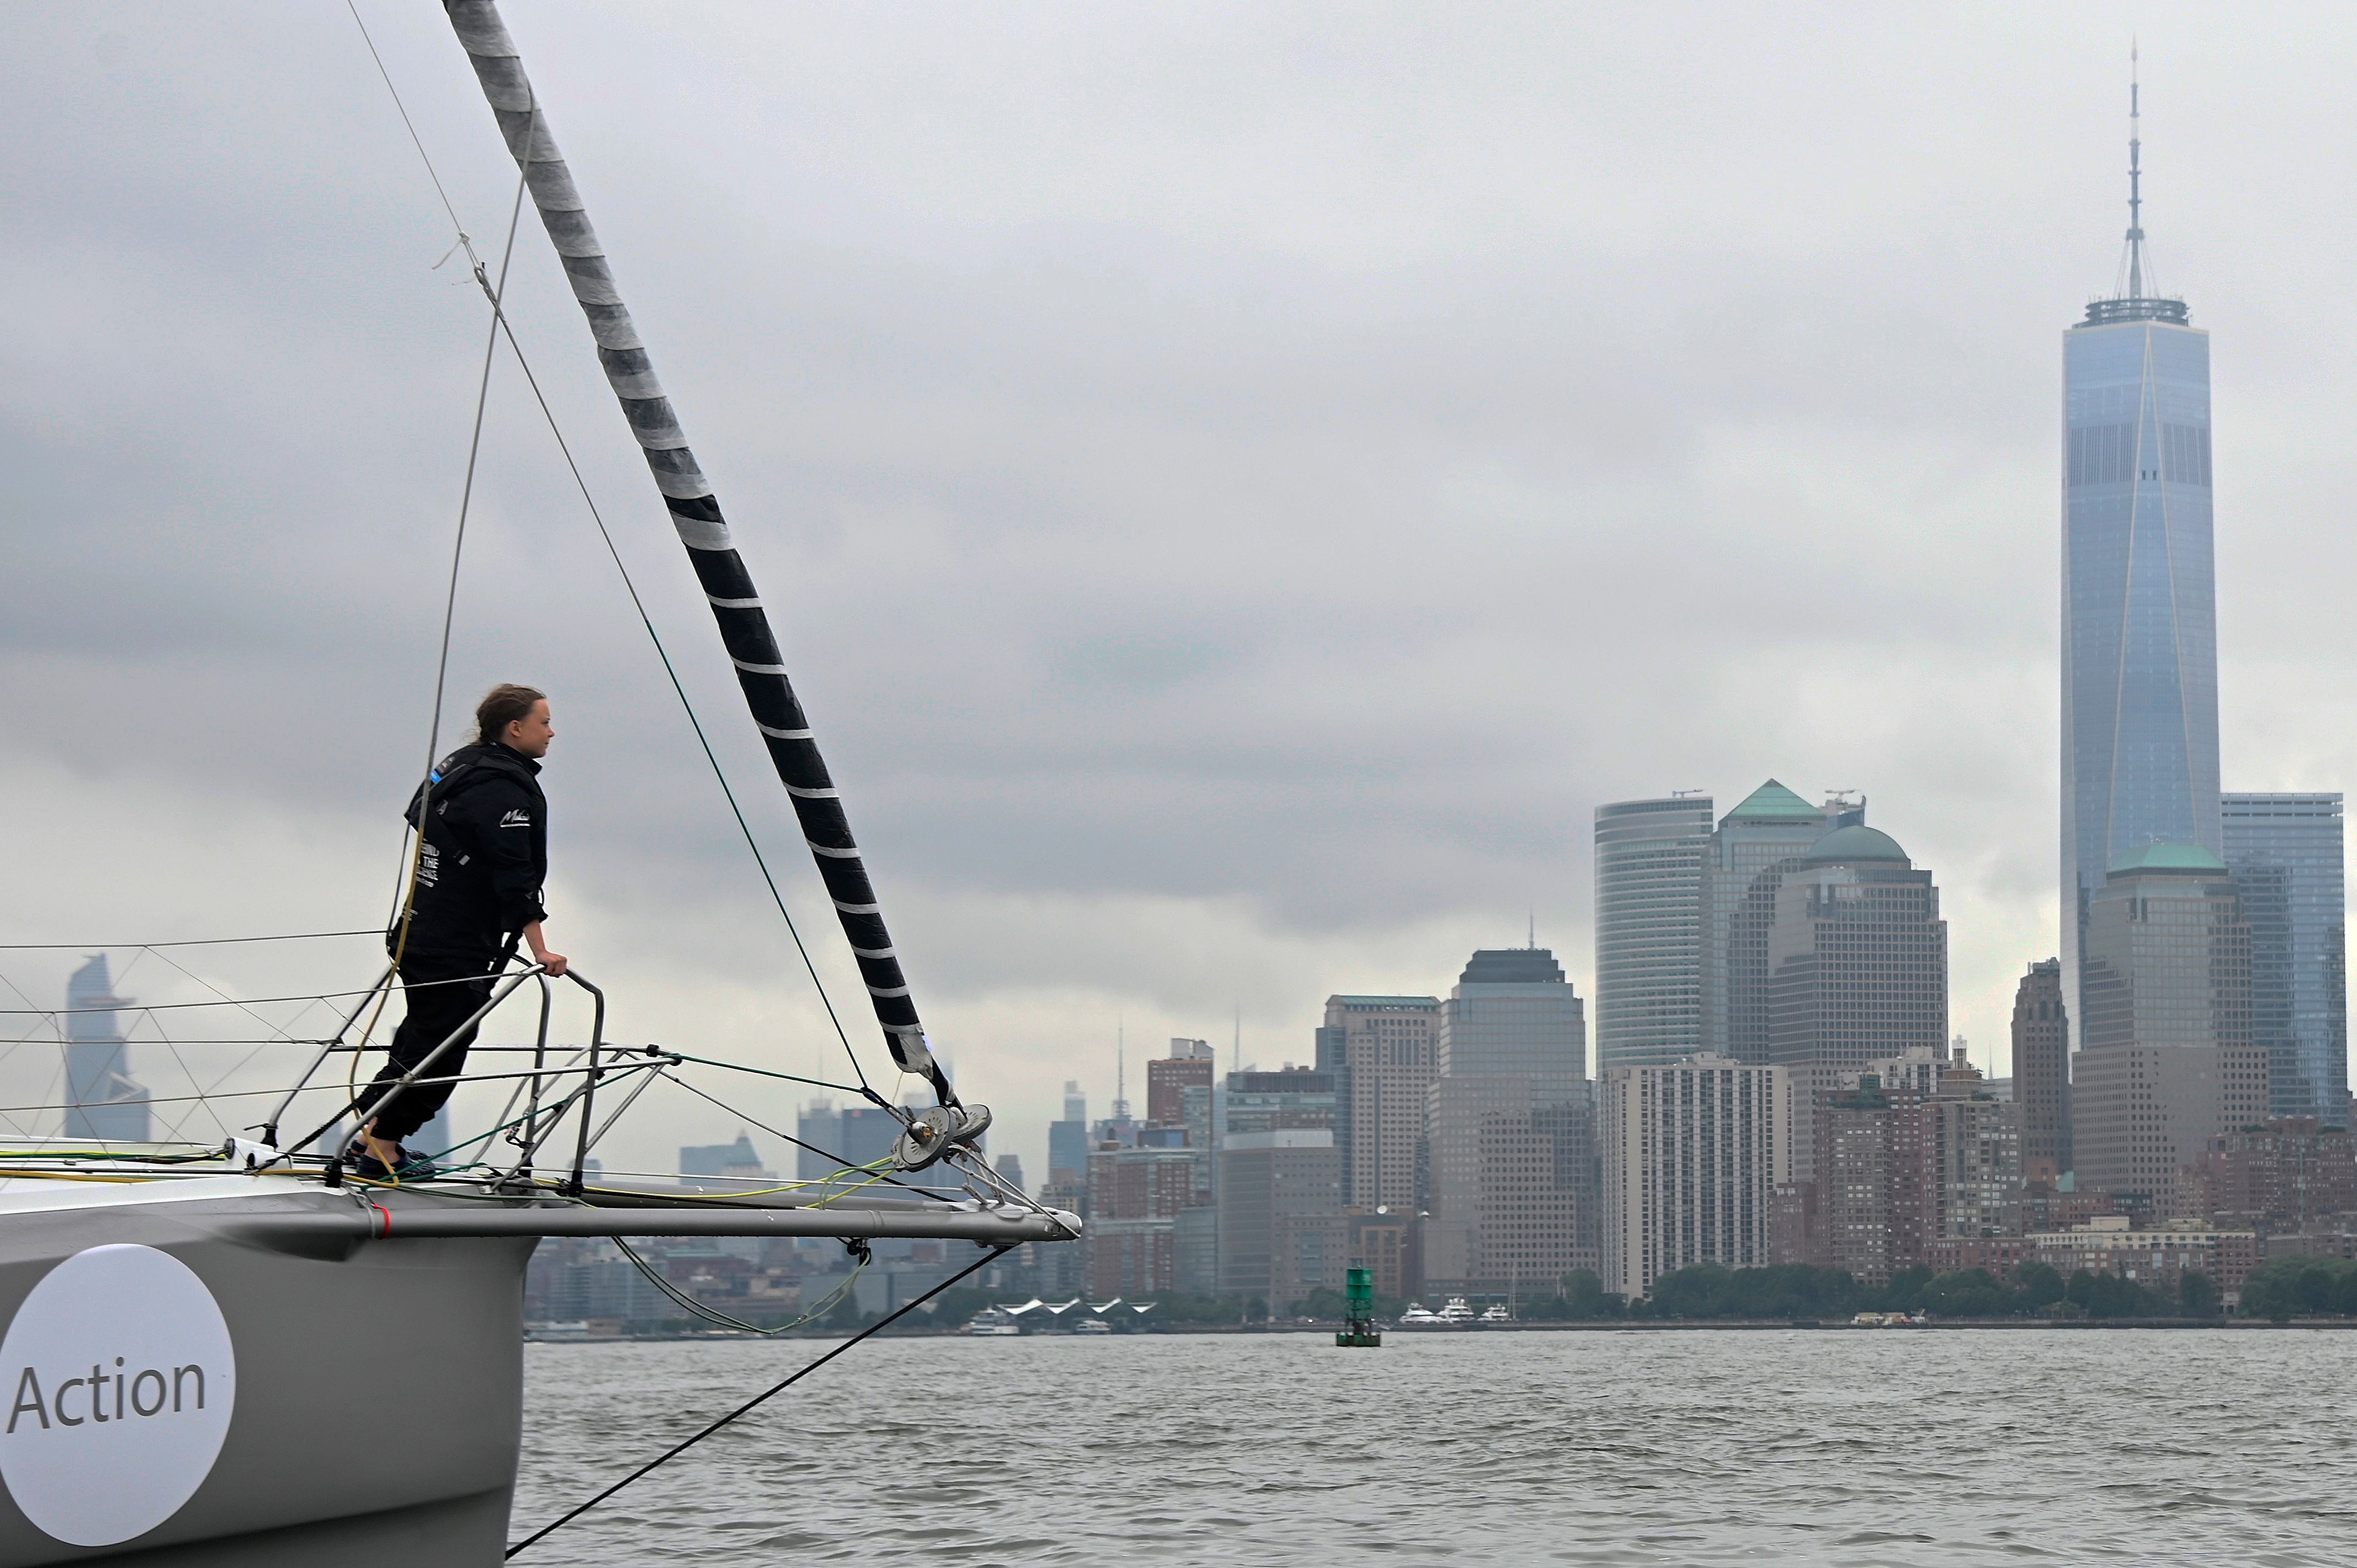 The Malizia II, a zero-carbon yacht, with Swedish climate activist Greta Thunberg, 16, arrives in the US after a 15-day journey crossing the Atlantic in on Aug. 28, 2019 in New York. (JOHANNES EISELE—AFP/Getty Images)